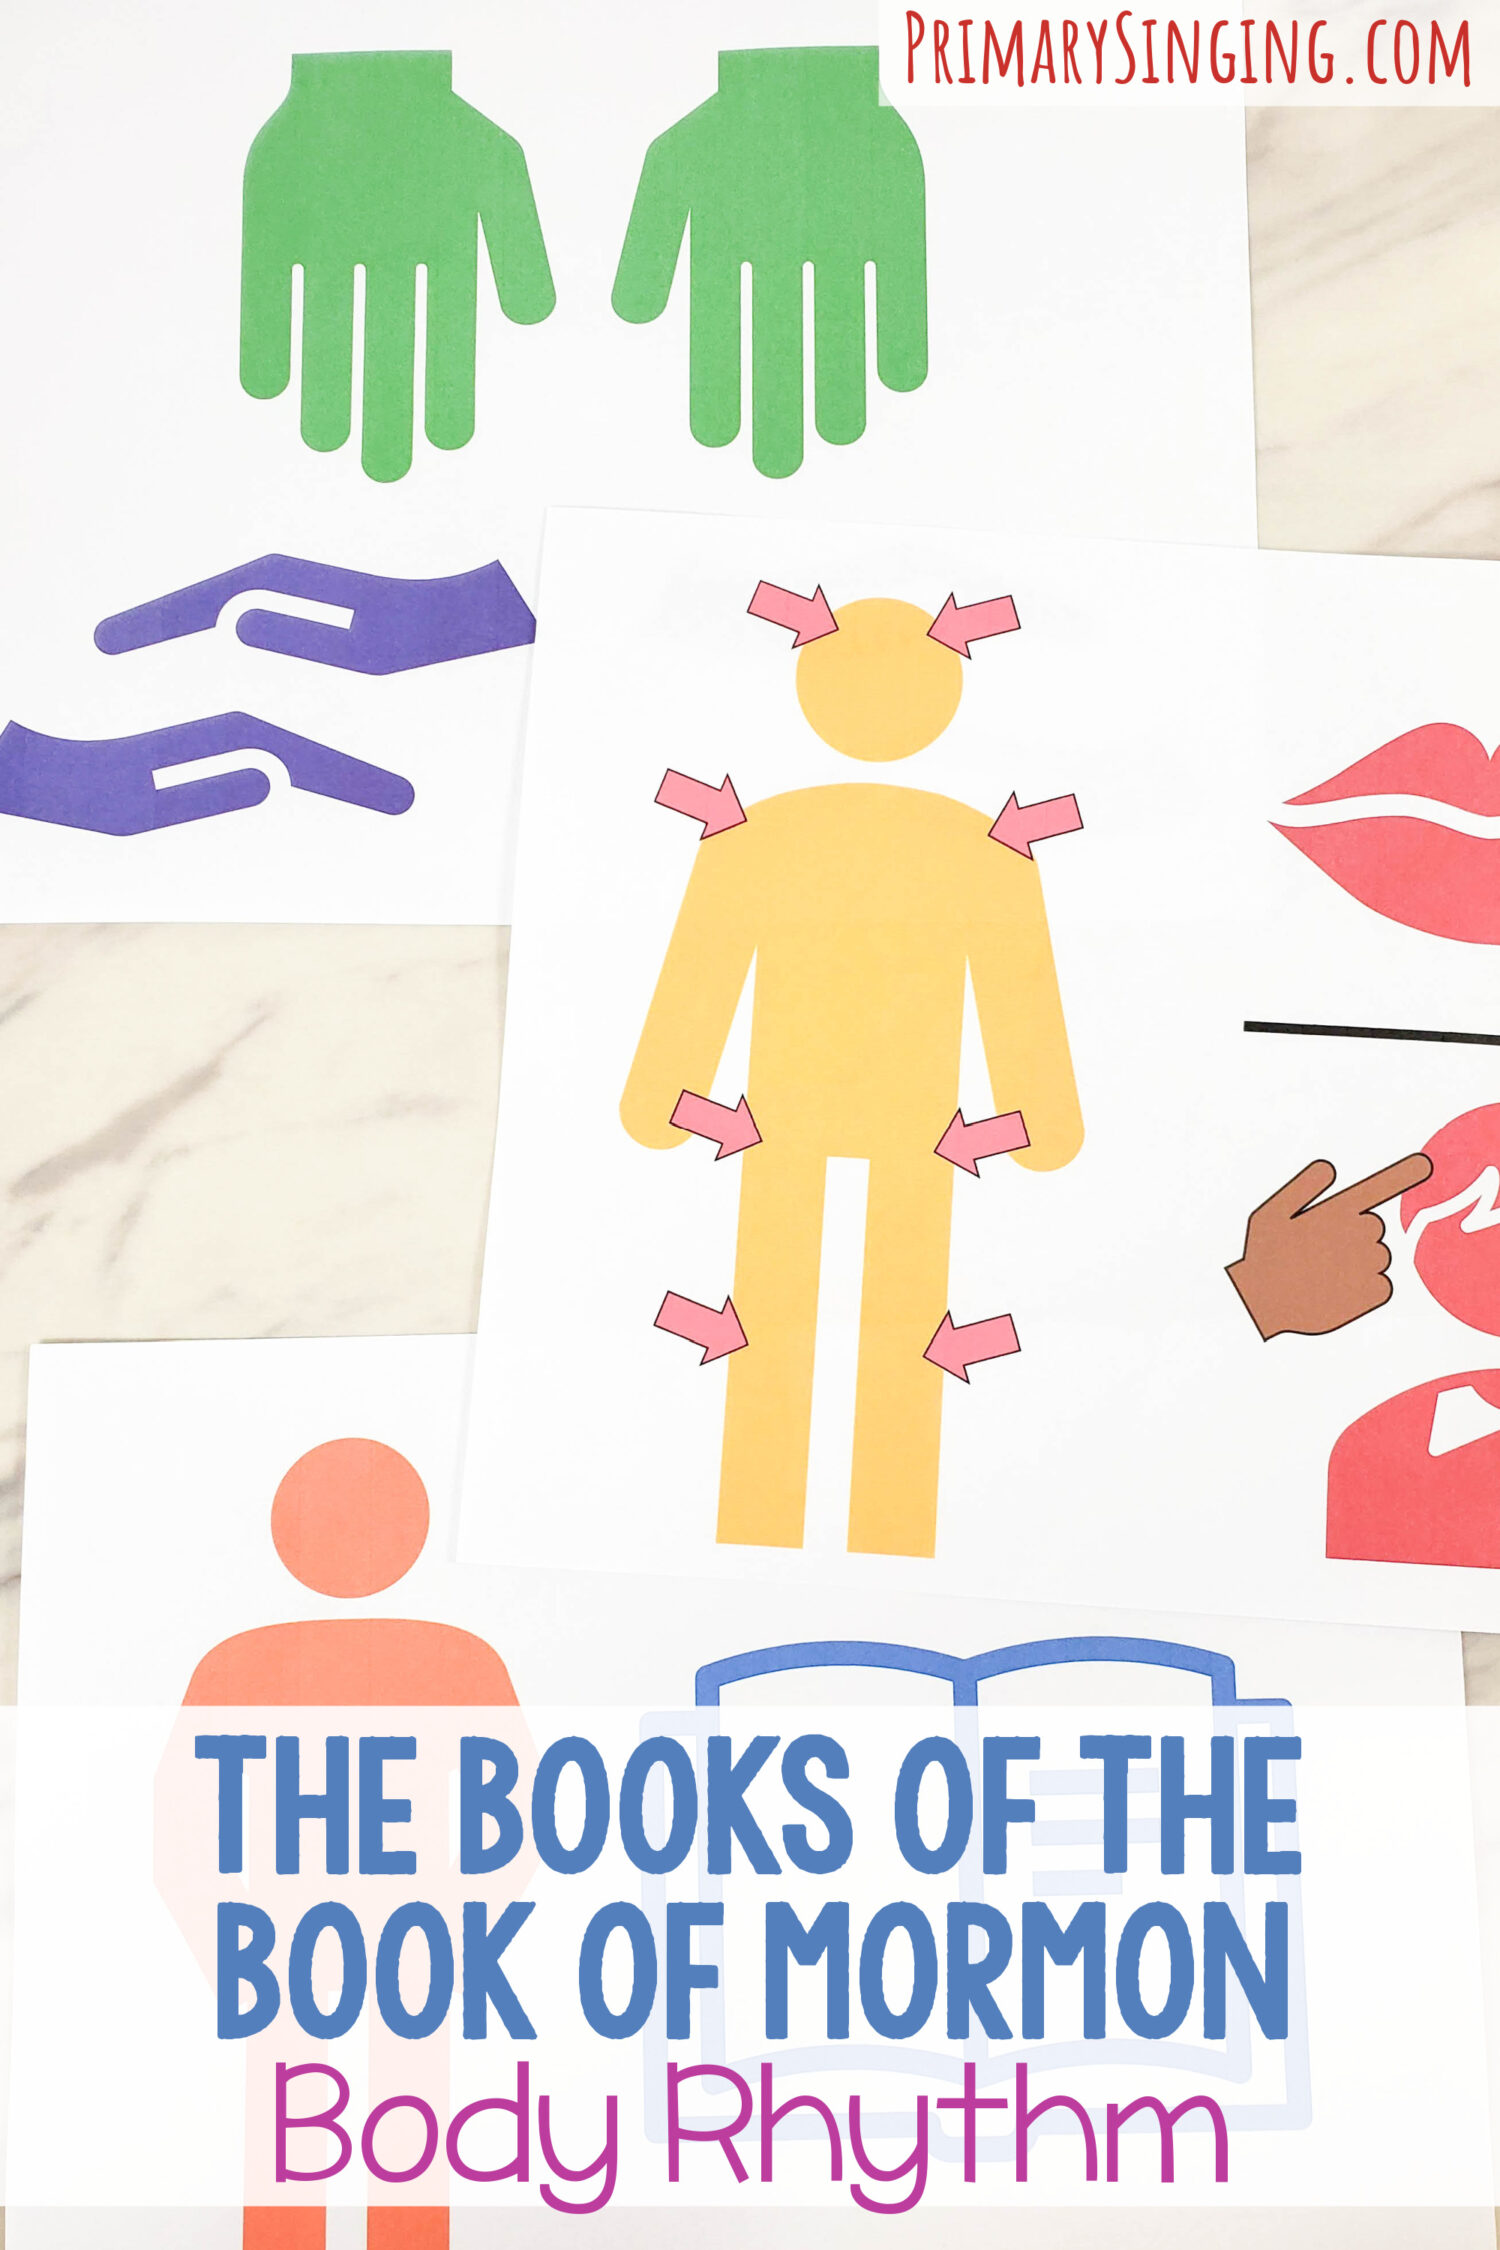 The Books of the Book of Mormon Body Rhythm singing time idea - fun way to get everyone up and moving and connect the melody with a movement sequence that the kids will go home practicing and singing as it's fun and easy to learn! Head over to see the full lesson plan and grab the free printable body rhythm pattern cards. For LDS Primary music leaders.